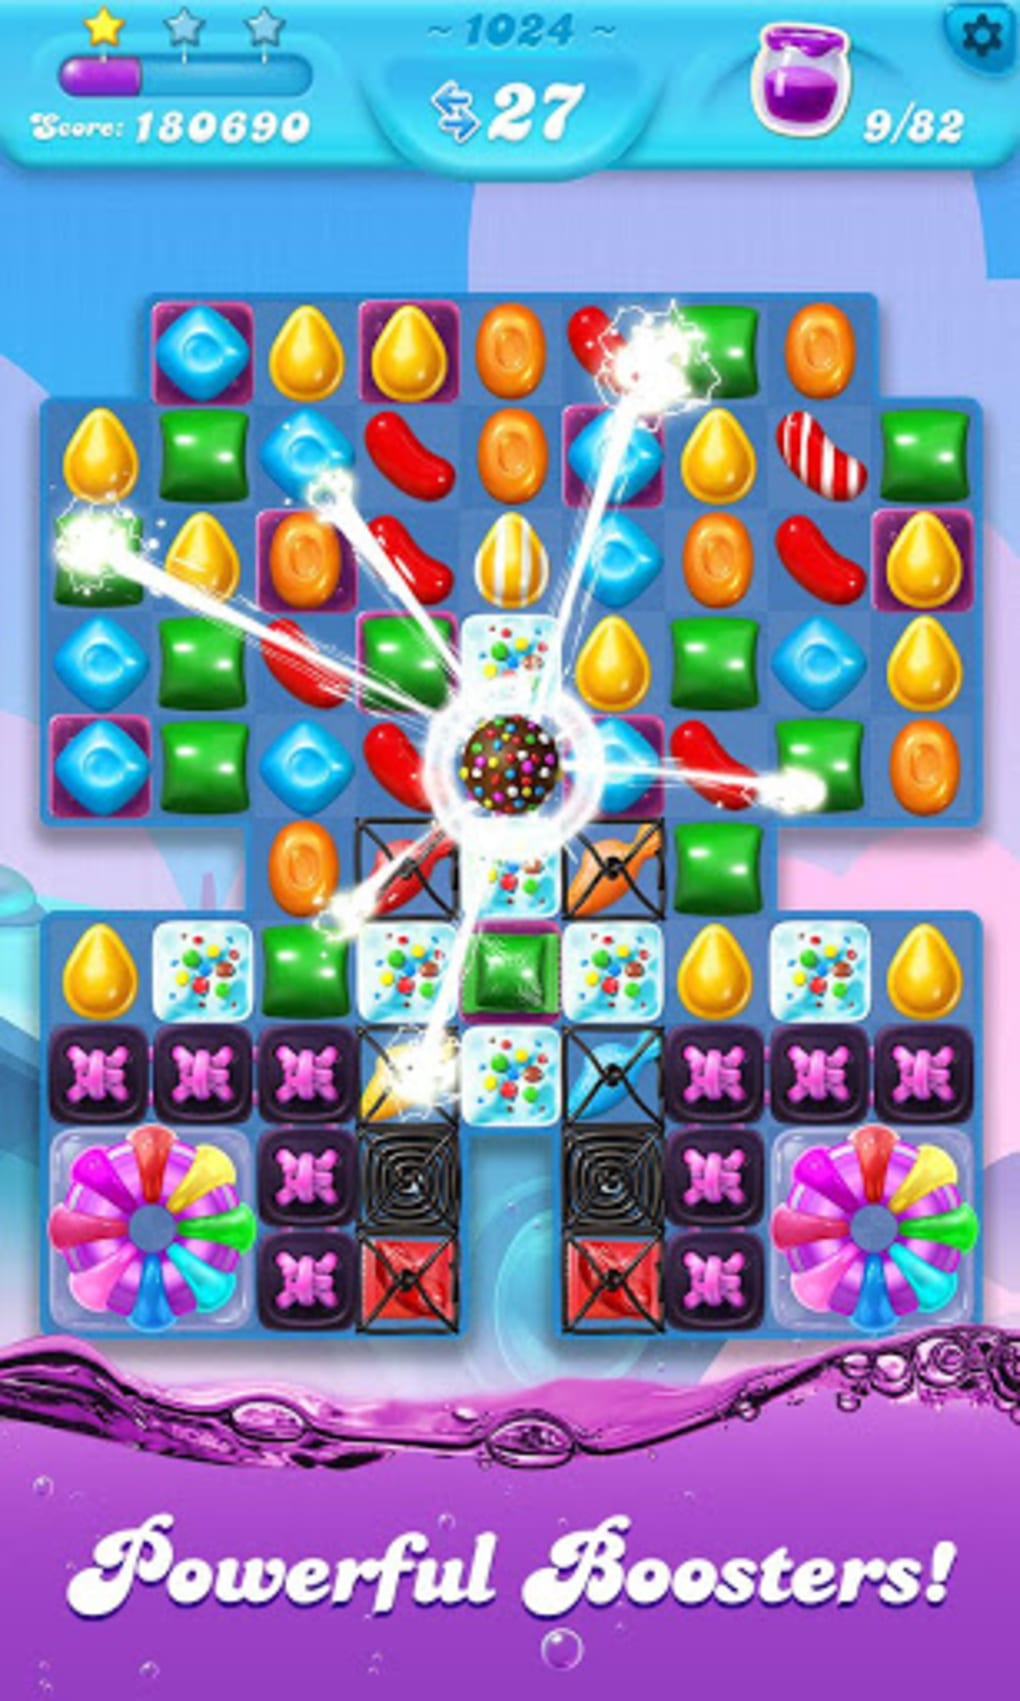 hiw many levels are there in candy crush soda saga